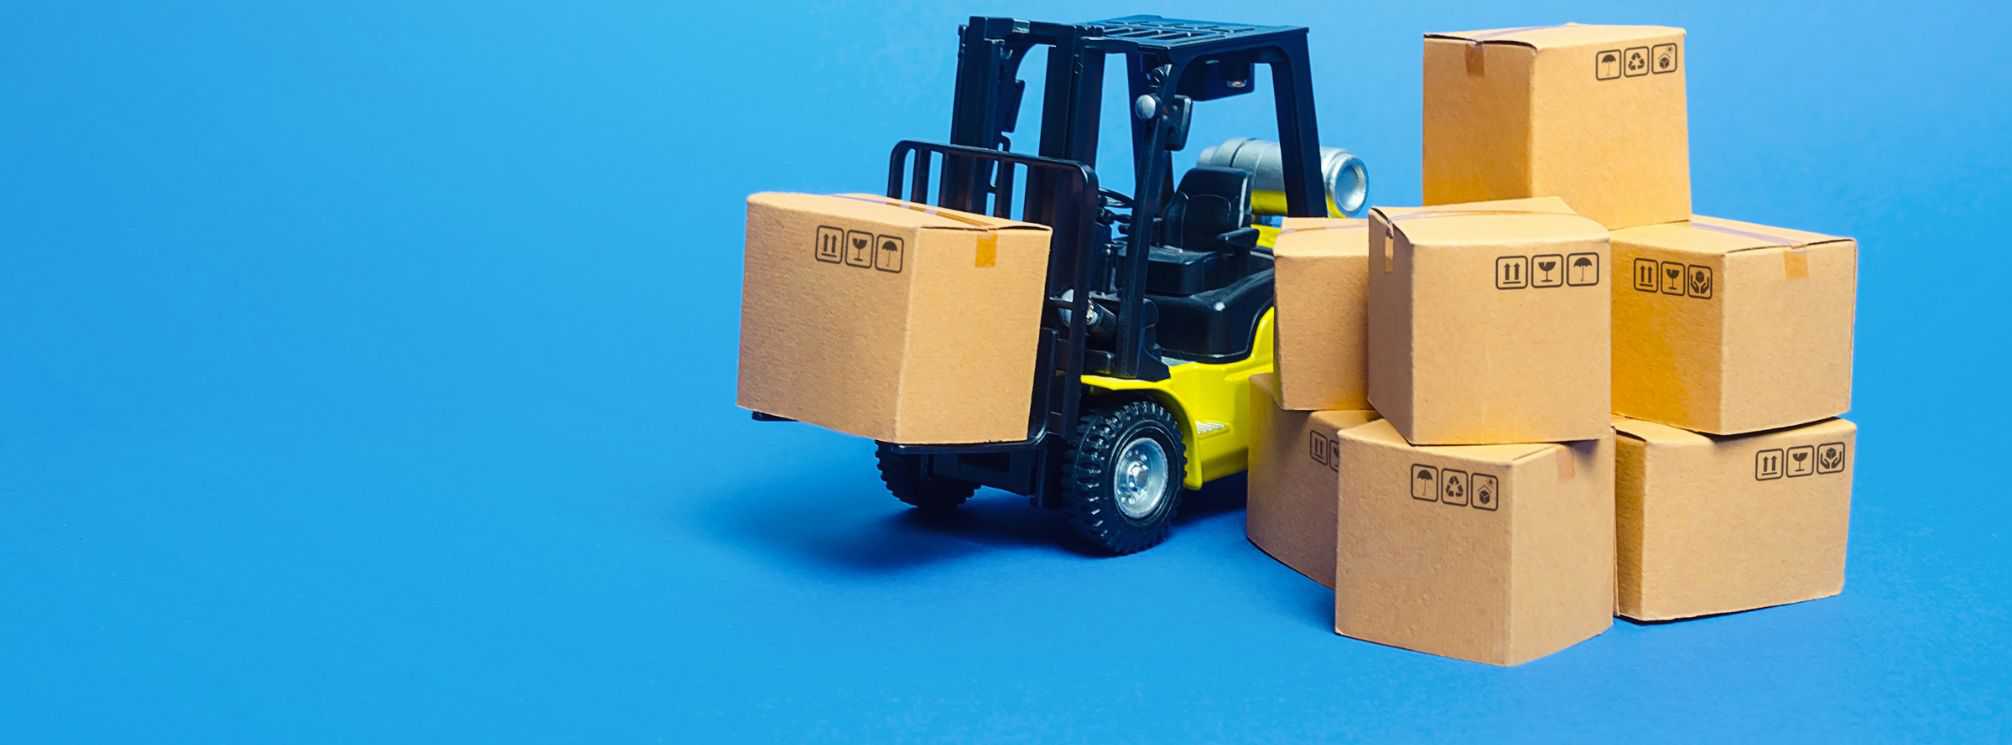 Model of a forklift lifting a box with a stack of boxes next to it.